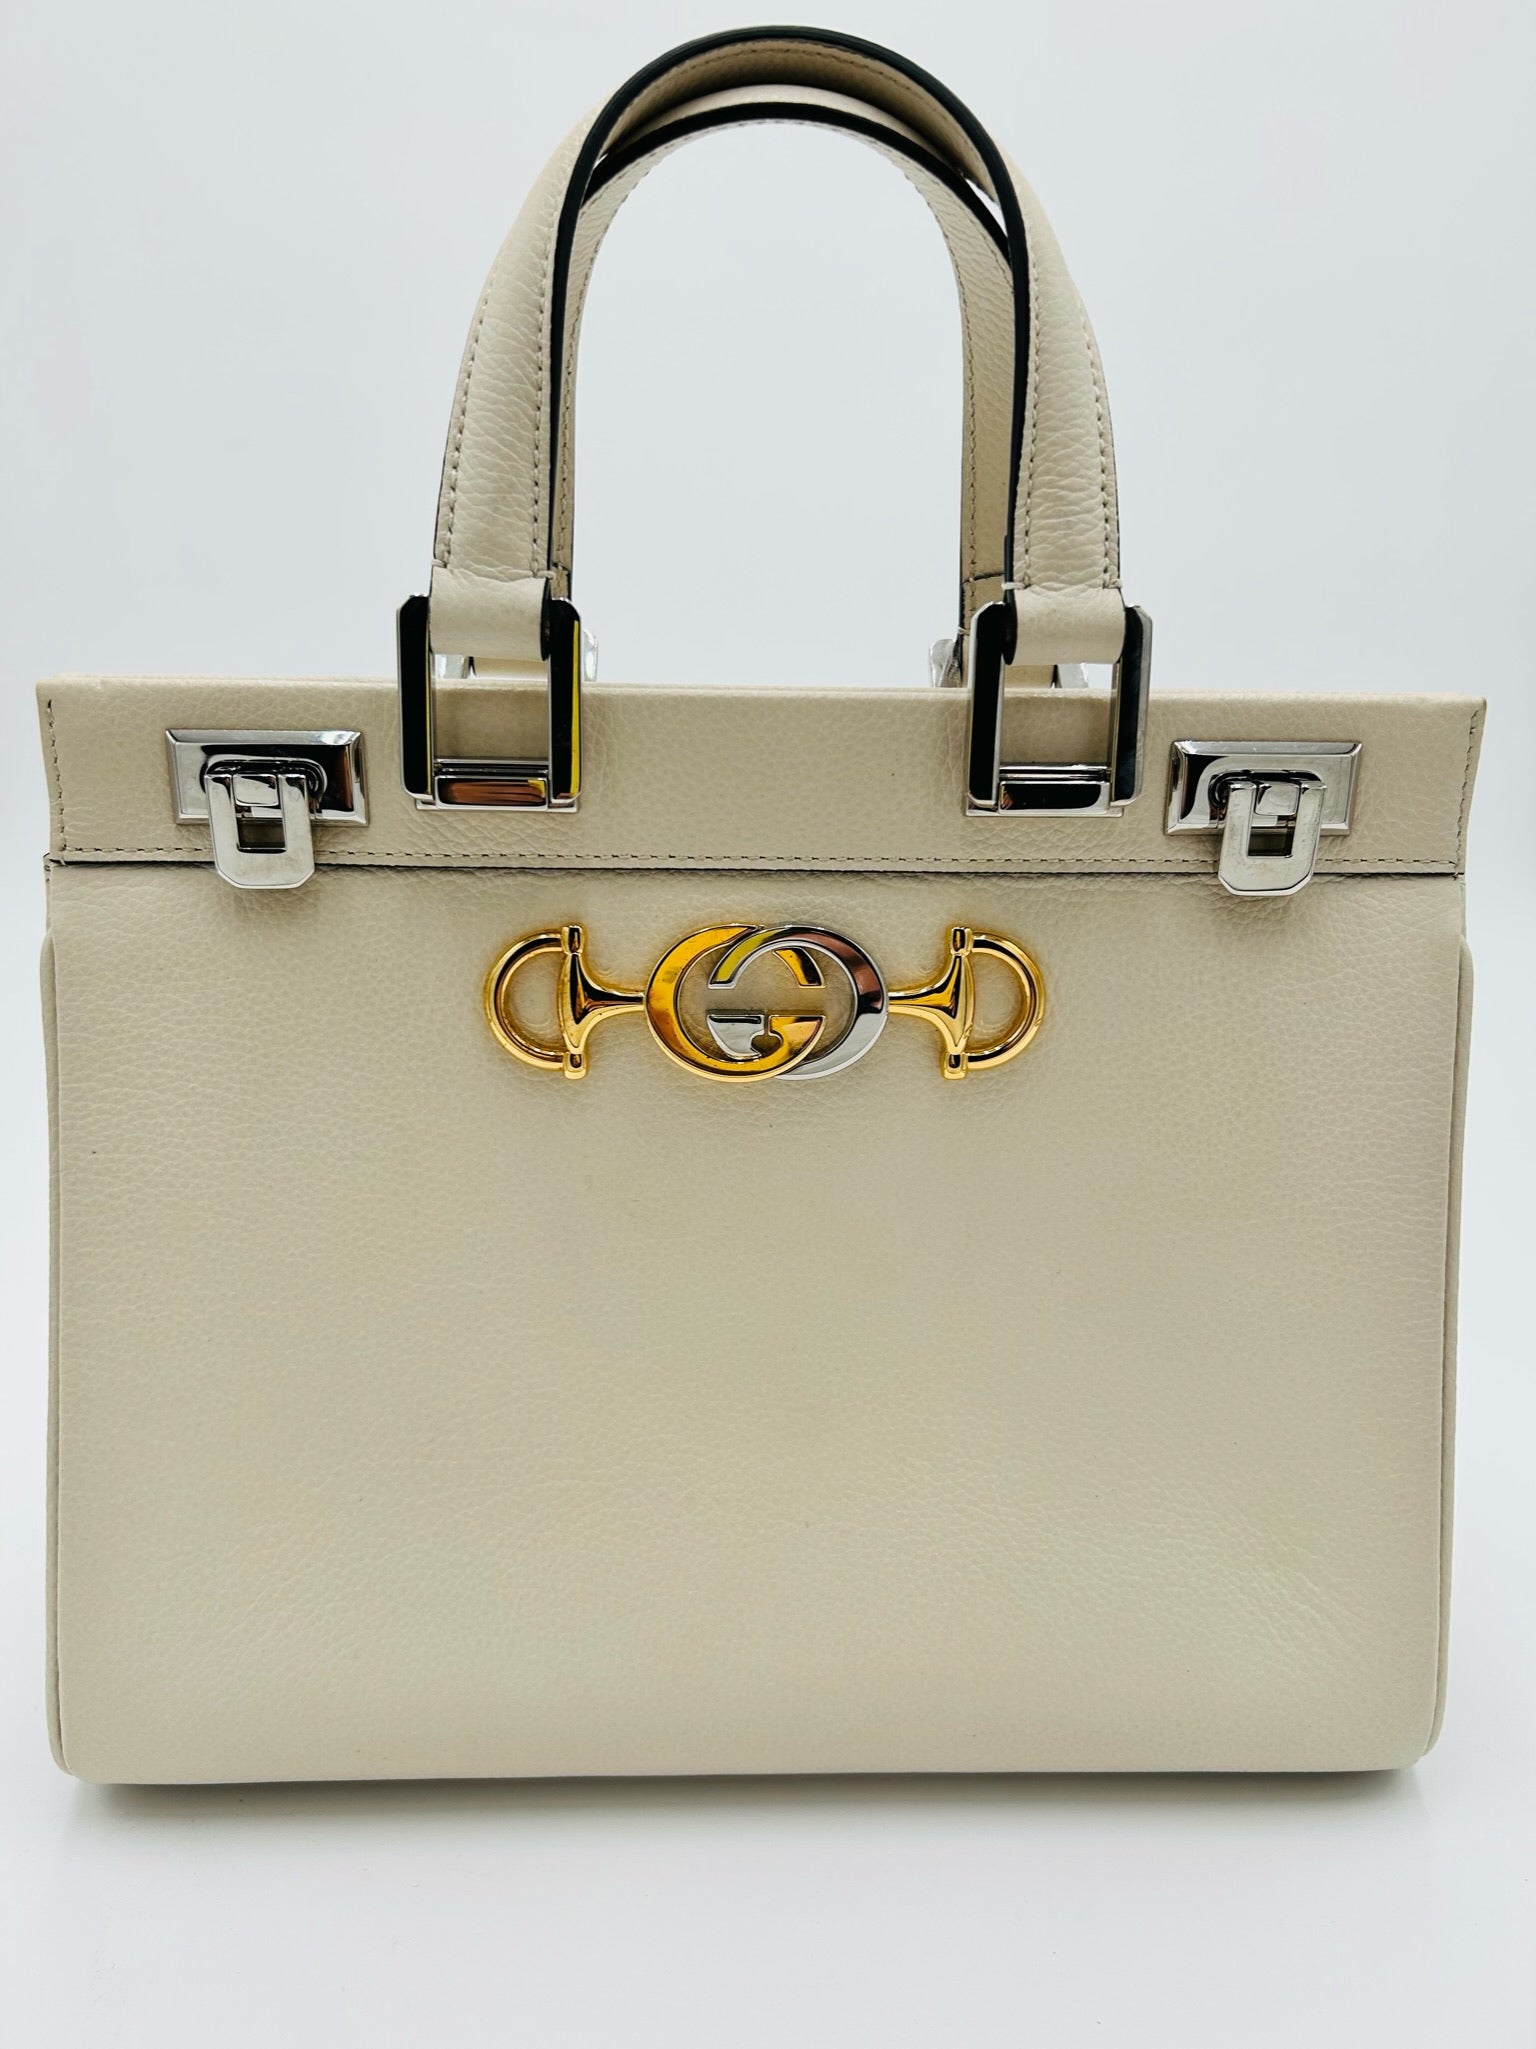 GUCCI ZUMI LEATHER 2WAY OFF WHITE BAG WITH LOGO FRONT